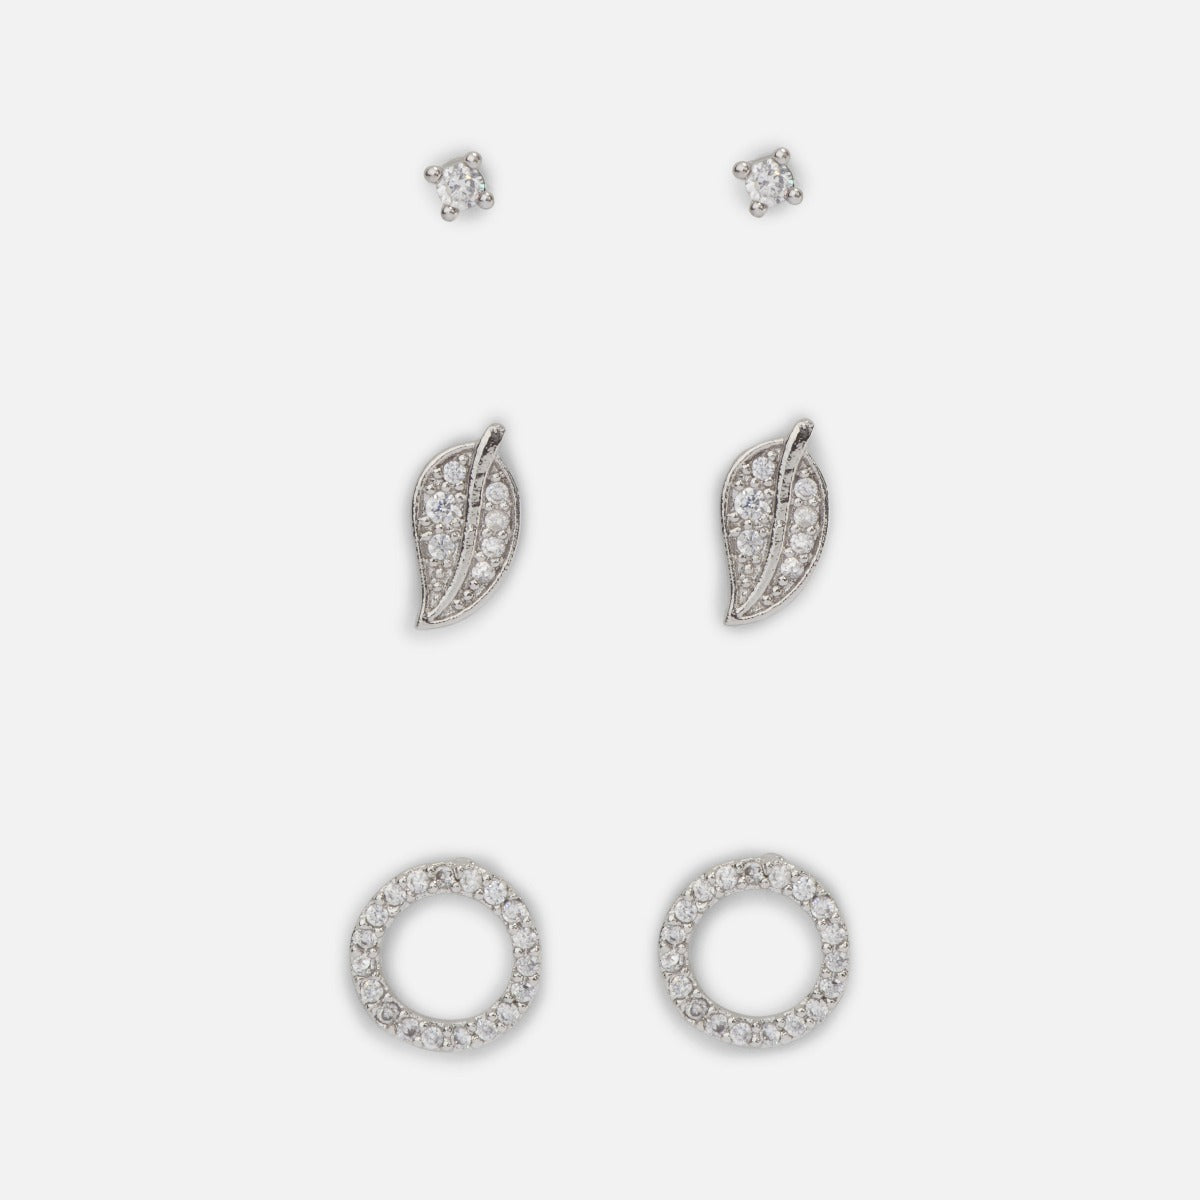 Set of earrings in leaf, circle and square shapes with cubic zirconia stones